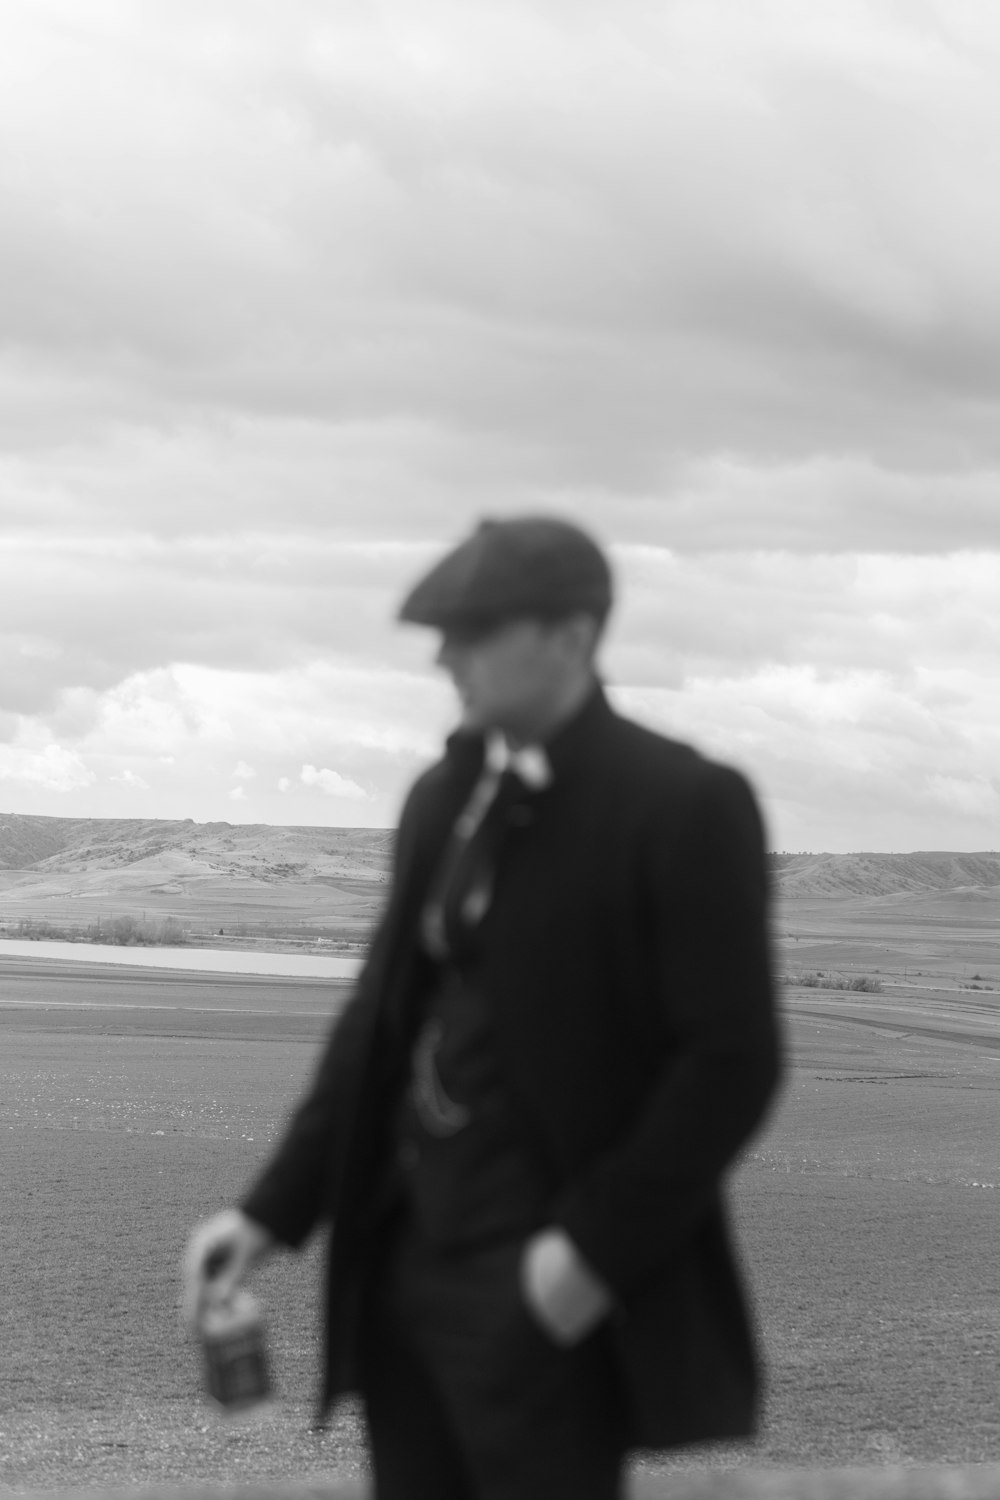 a man in a suit and hat walking on a beach